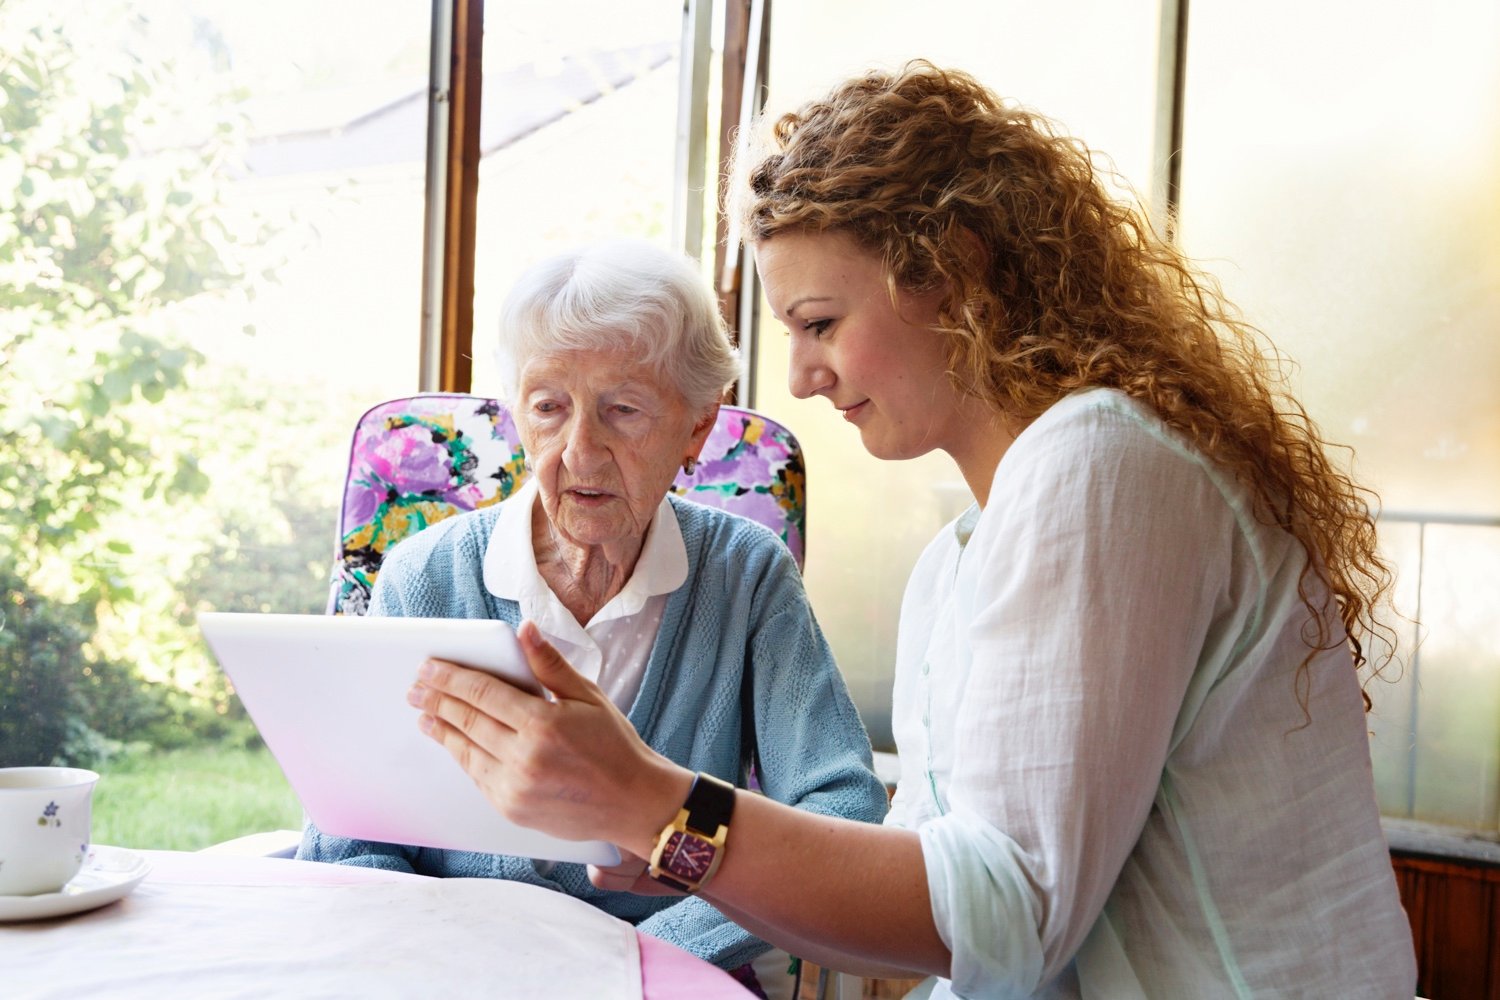 A staff member helps a senior woman with a digital pad